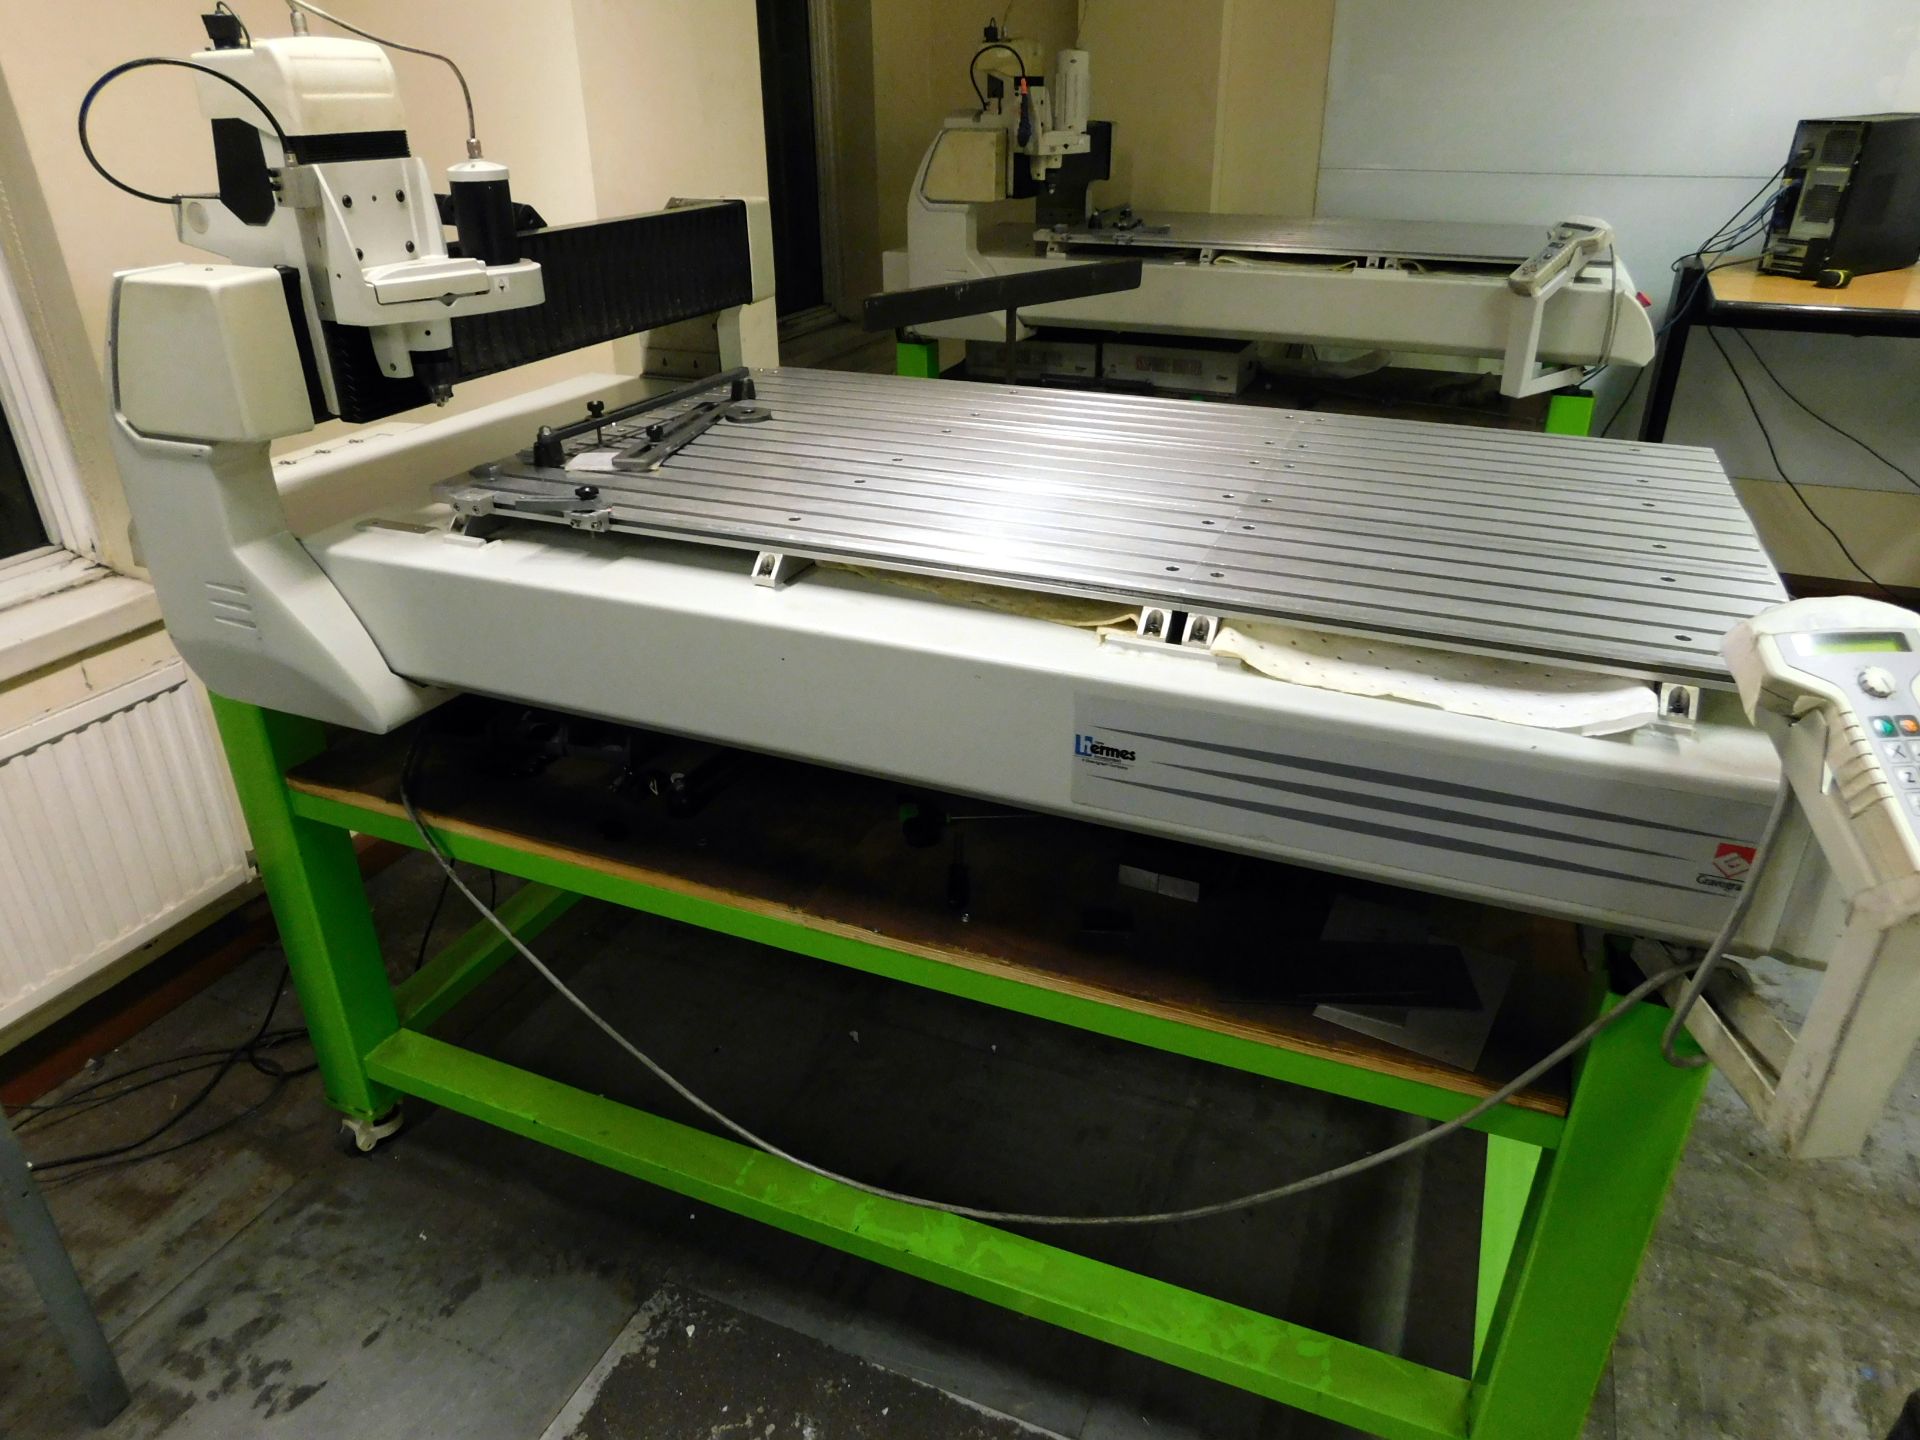 2006 Gravograph Type 158000 CNC Engraving Machine S/No 52843 on steel workbench with Control - Image 2 of 3